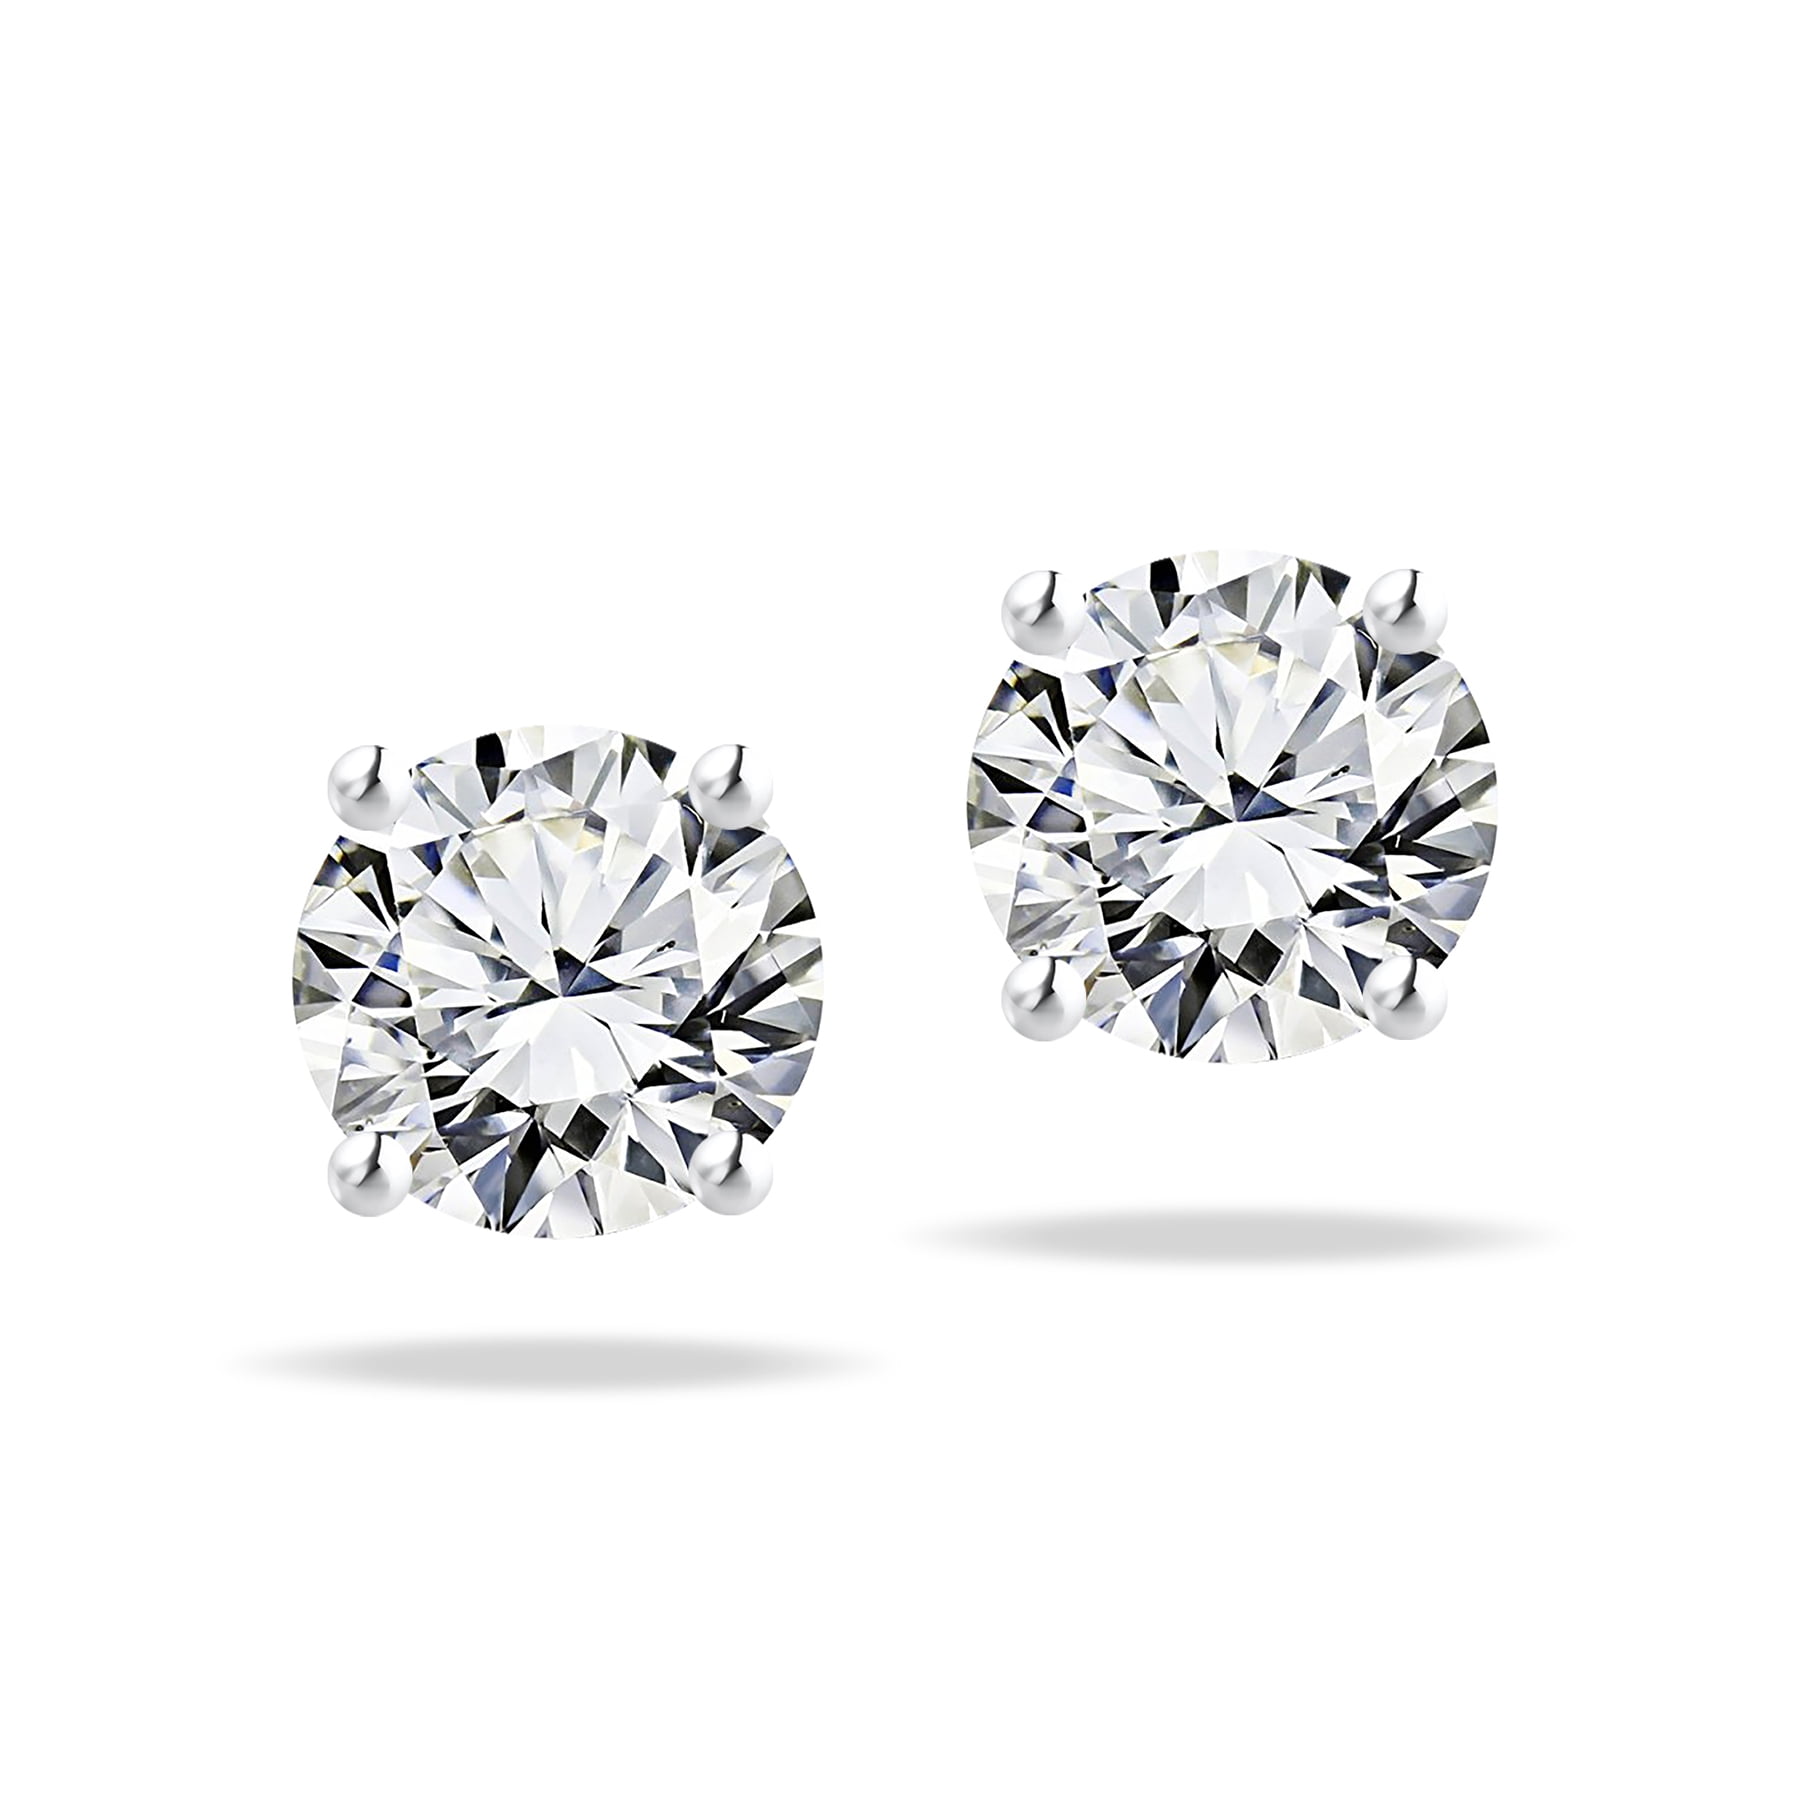 JeenMata 2 Carat Round Shaped Moissanite Solitaire Stud Earrings - 4 Prong  - In 18K White Gold Plating Over Silver